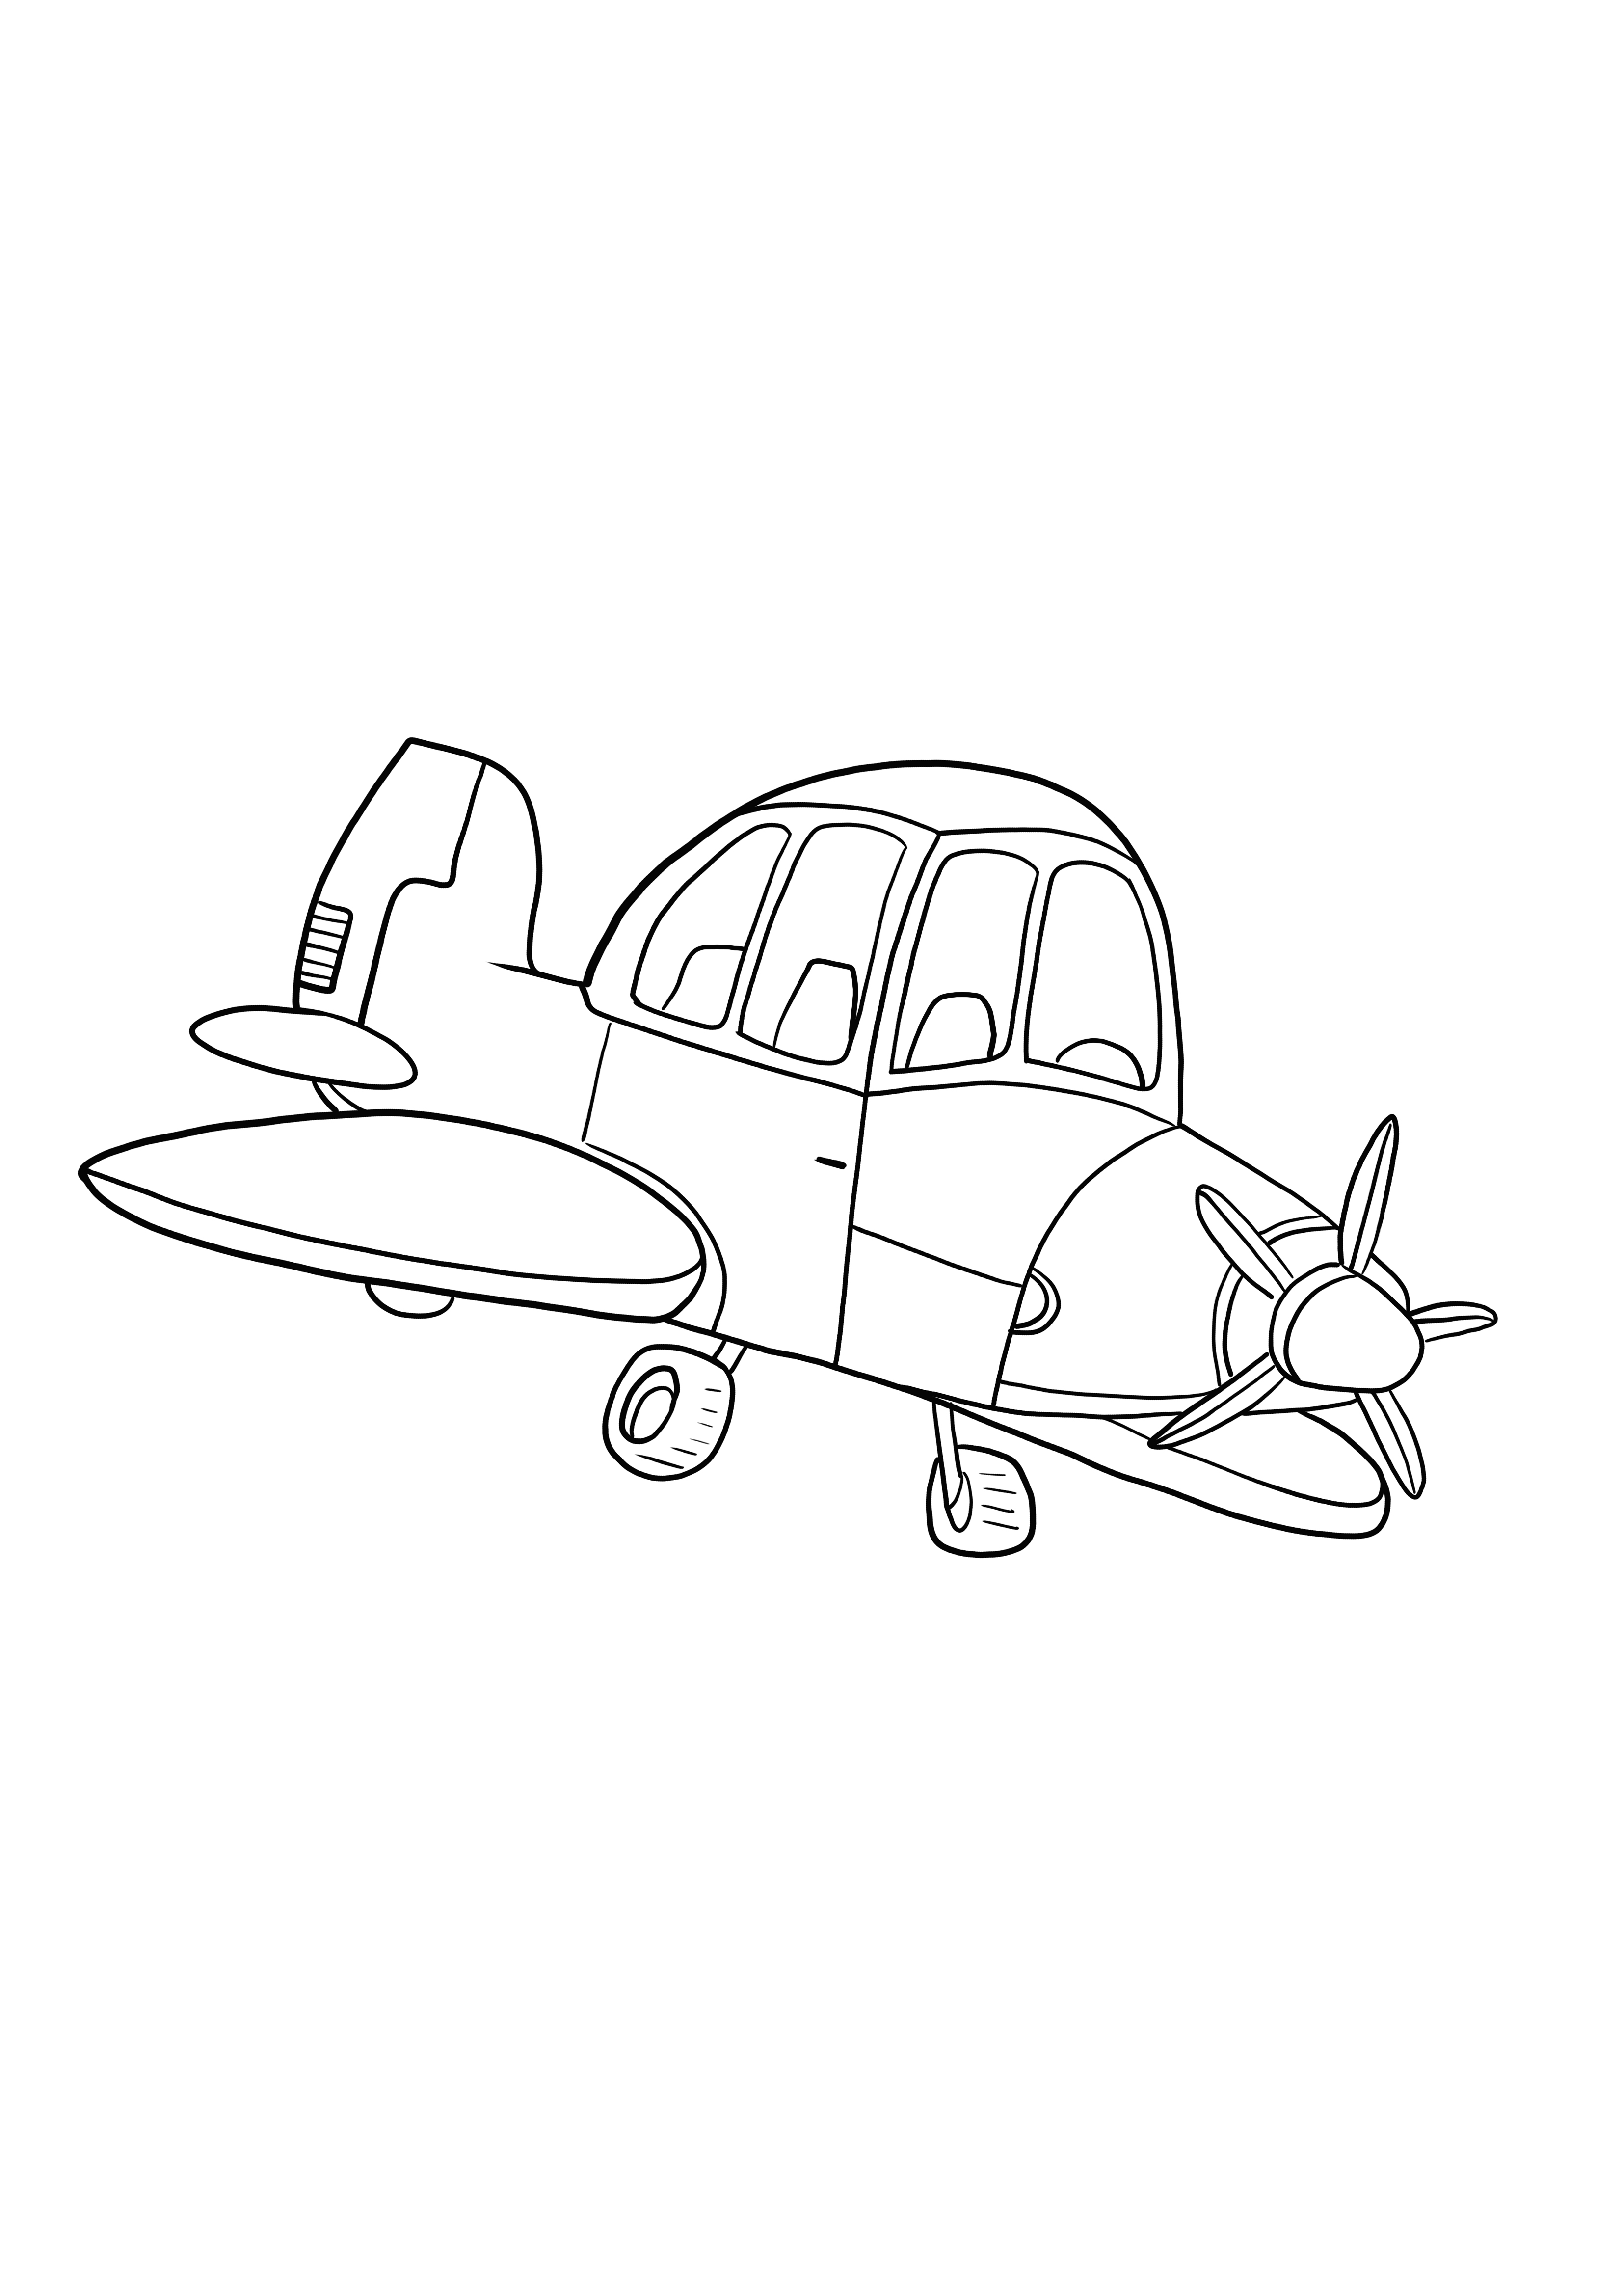 small plane free to color and print